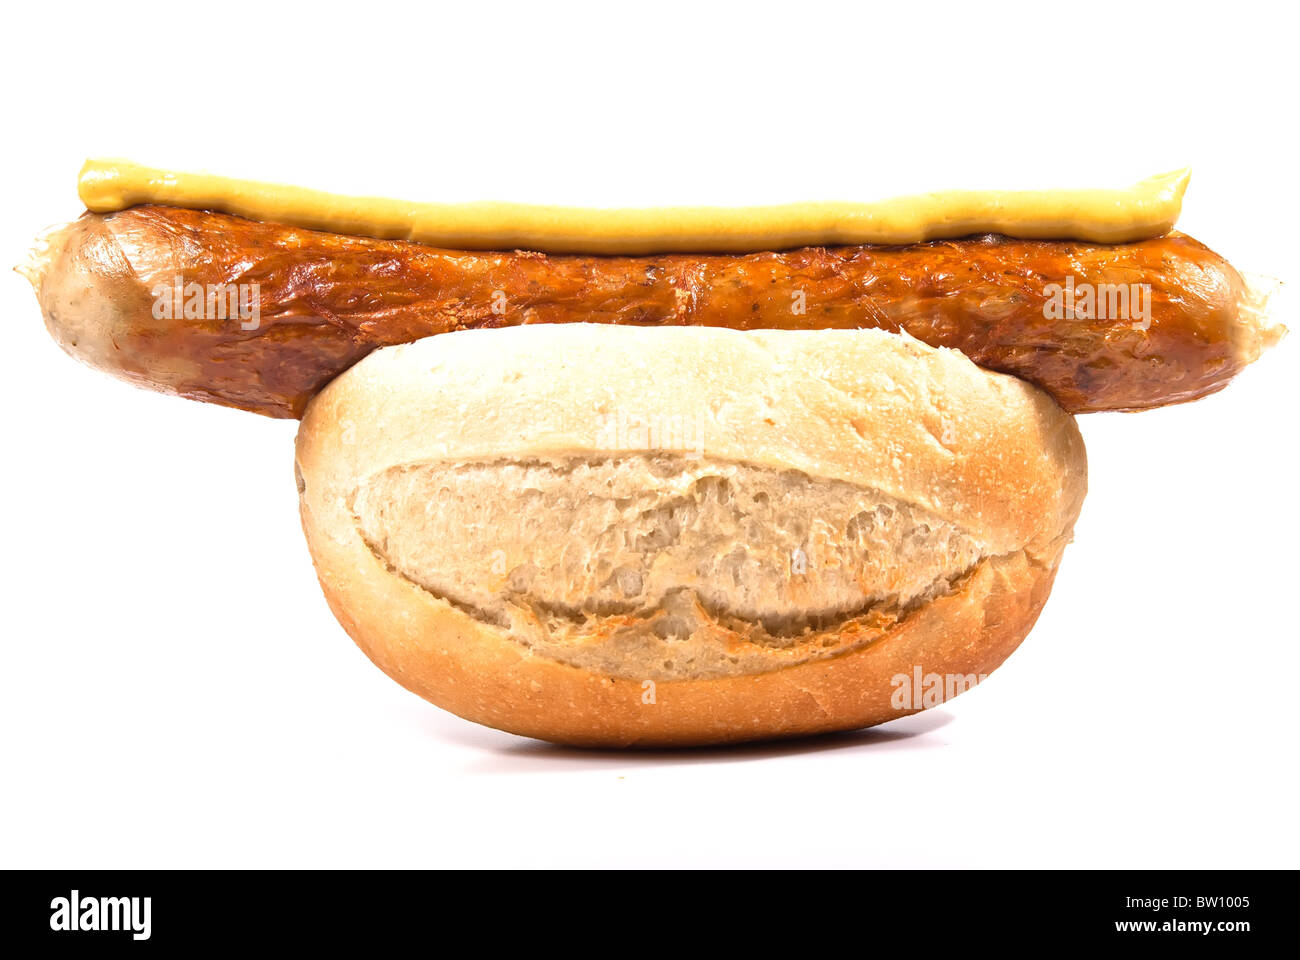 Sausage in a bun on a white background Stock Photo